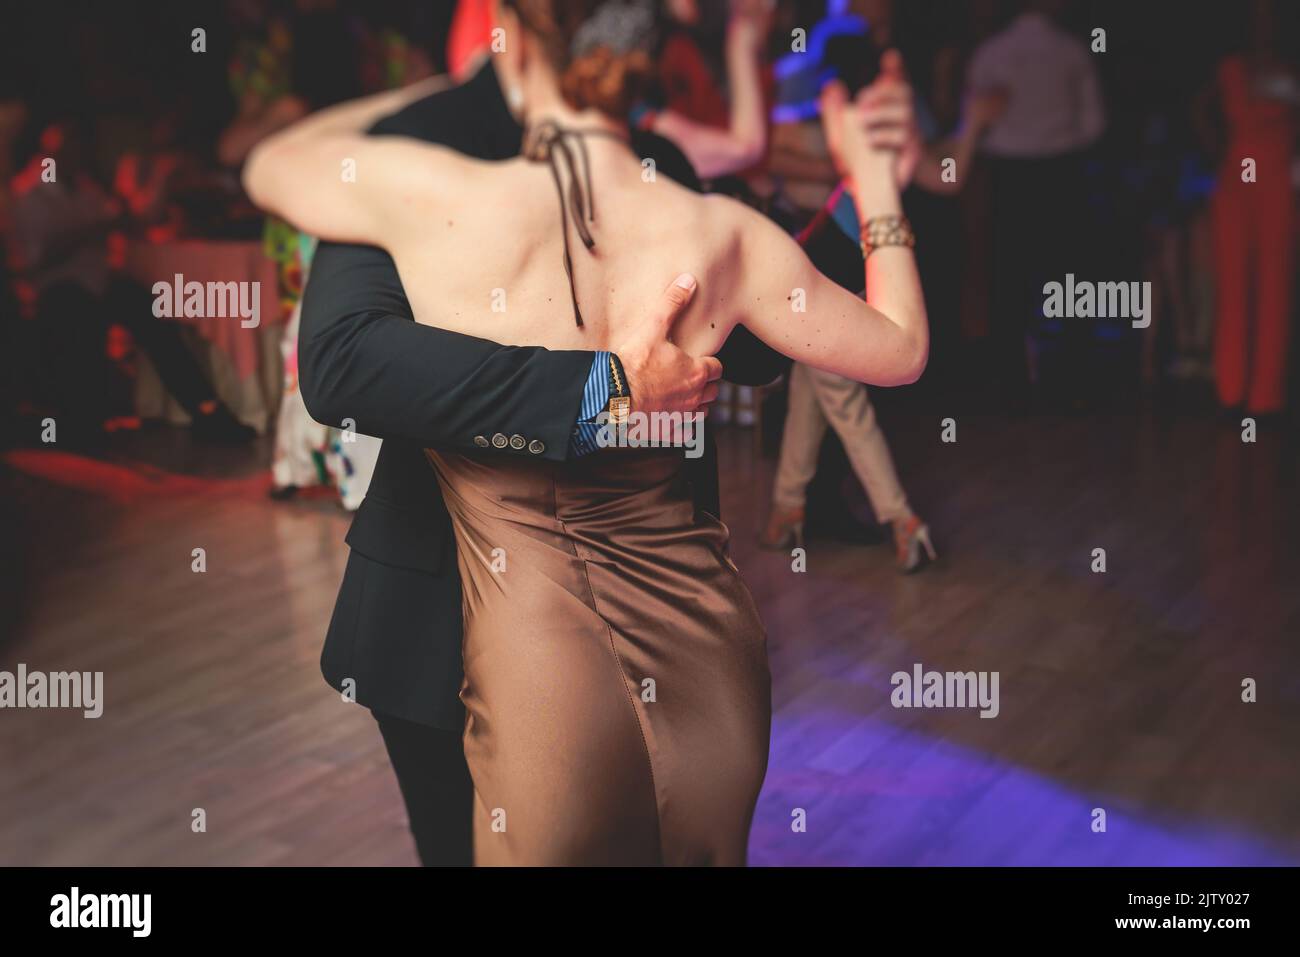 Couples dancing traditional latin argentinian dance milonga in the ballroom, tango salsa bachata kizomba lesson in the red and purple lights, dance fe Stock Photo